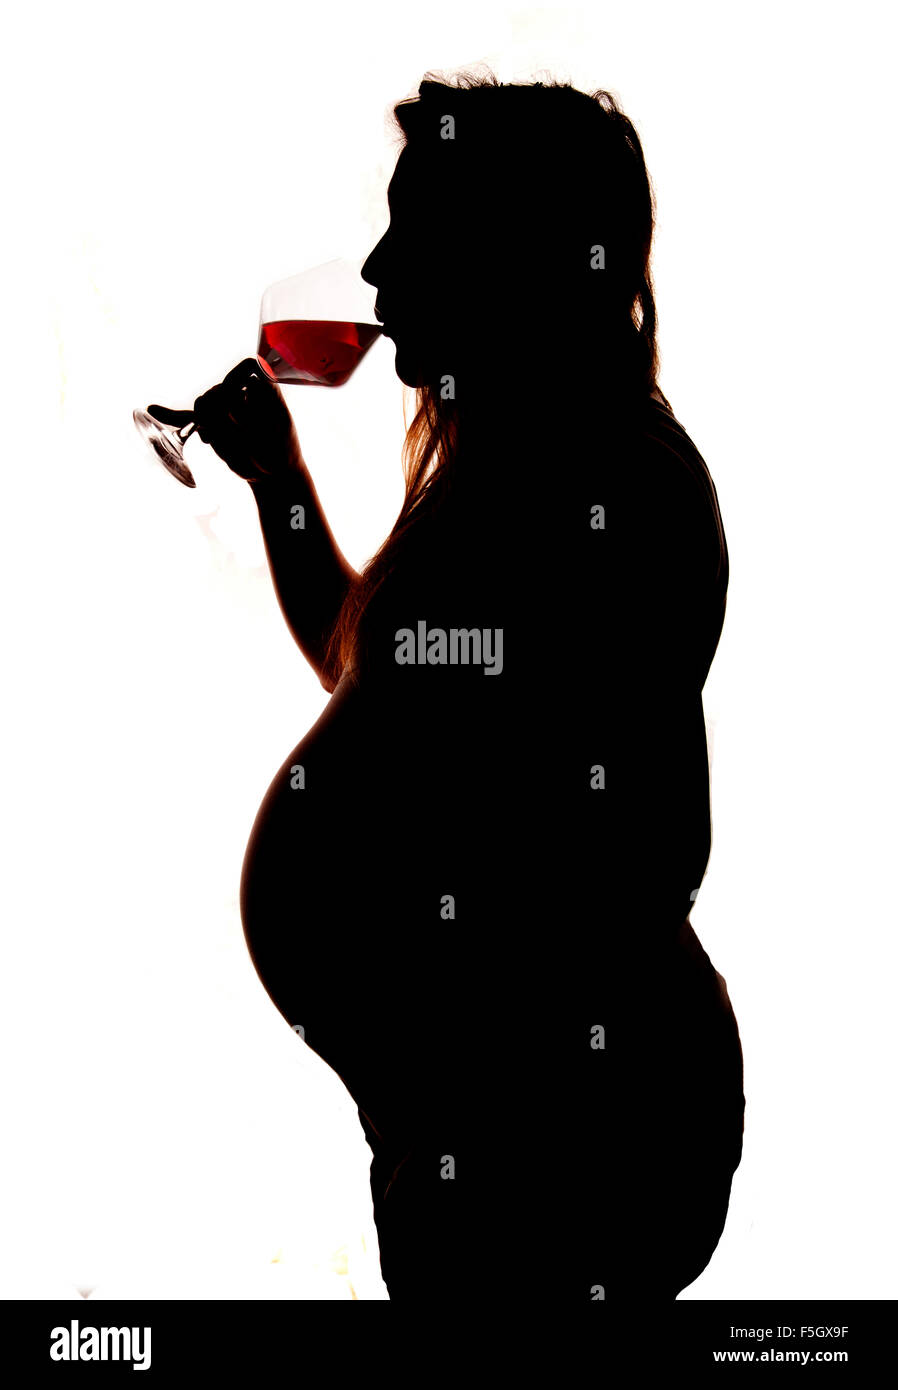 Pregnant women drinking red wine silhouette cutout Stock Photo